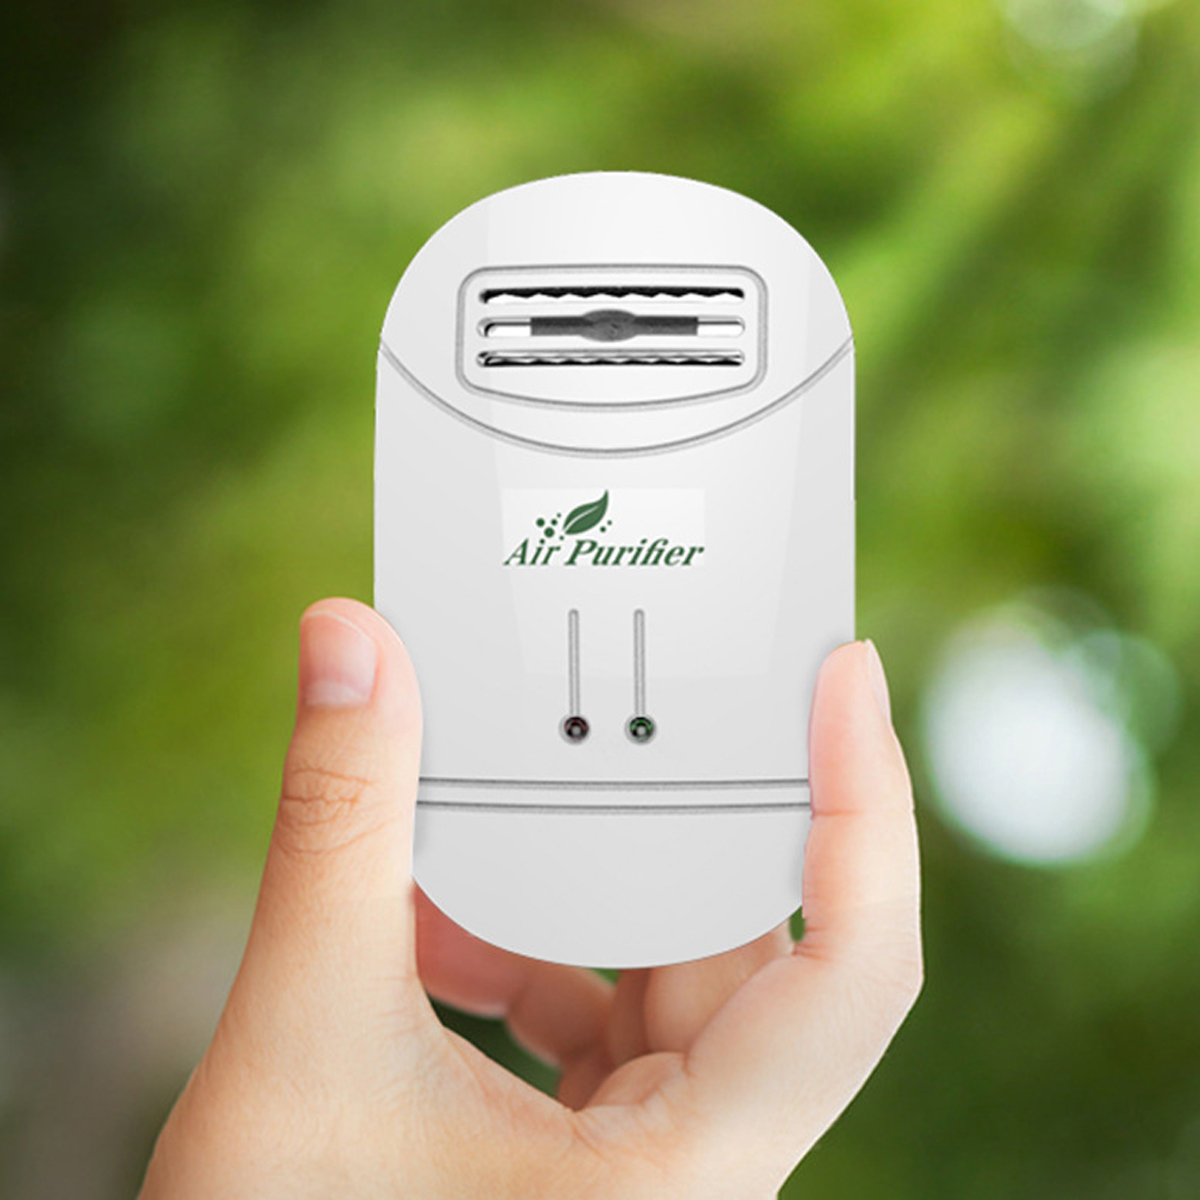 Mini-Air-Purifier-Odor-Remover-Portable-Air-Cleaner-Odor-Freshener-Allergies-Eliminator-for-Smokers-1444631